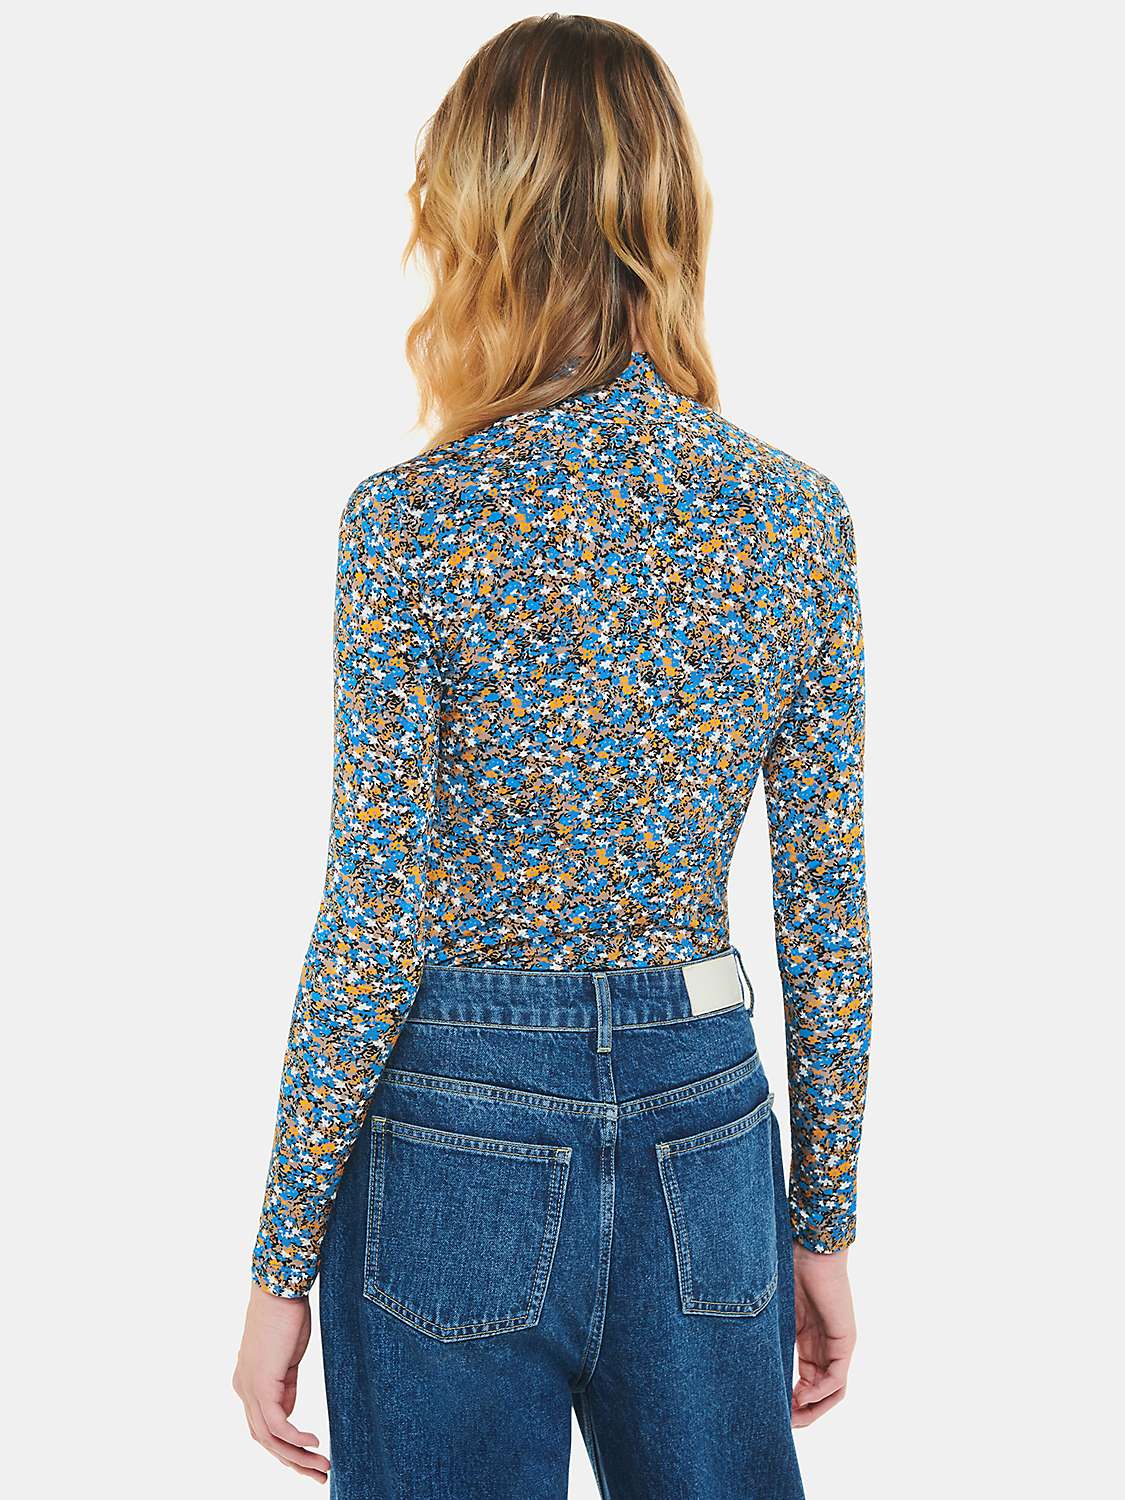 Buy Whistles Ditsy Floral Slinky High Neck Top, Multi Online at johnlewis.com